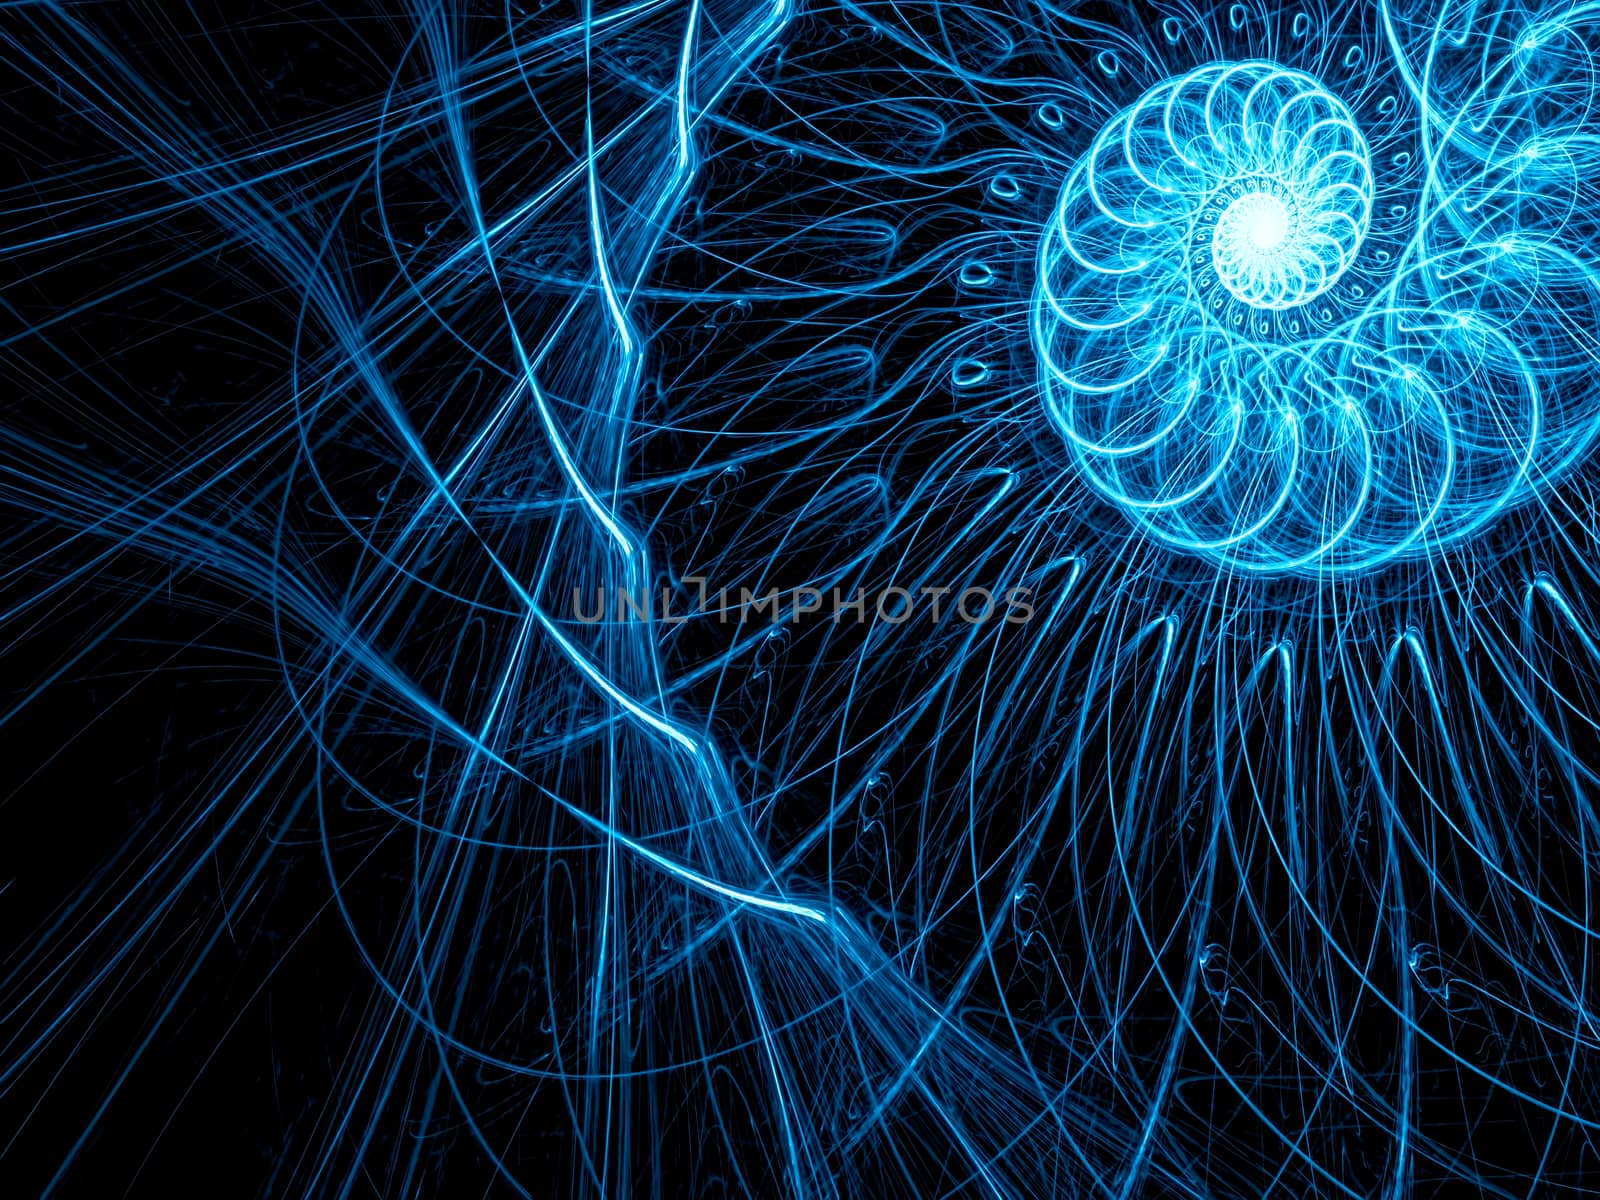 Dark background with randomly placed lines and spiral in the upper right corner. Abstract computer-generated image for covers, web design, banners.